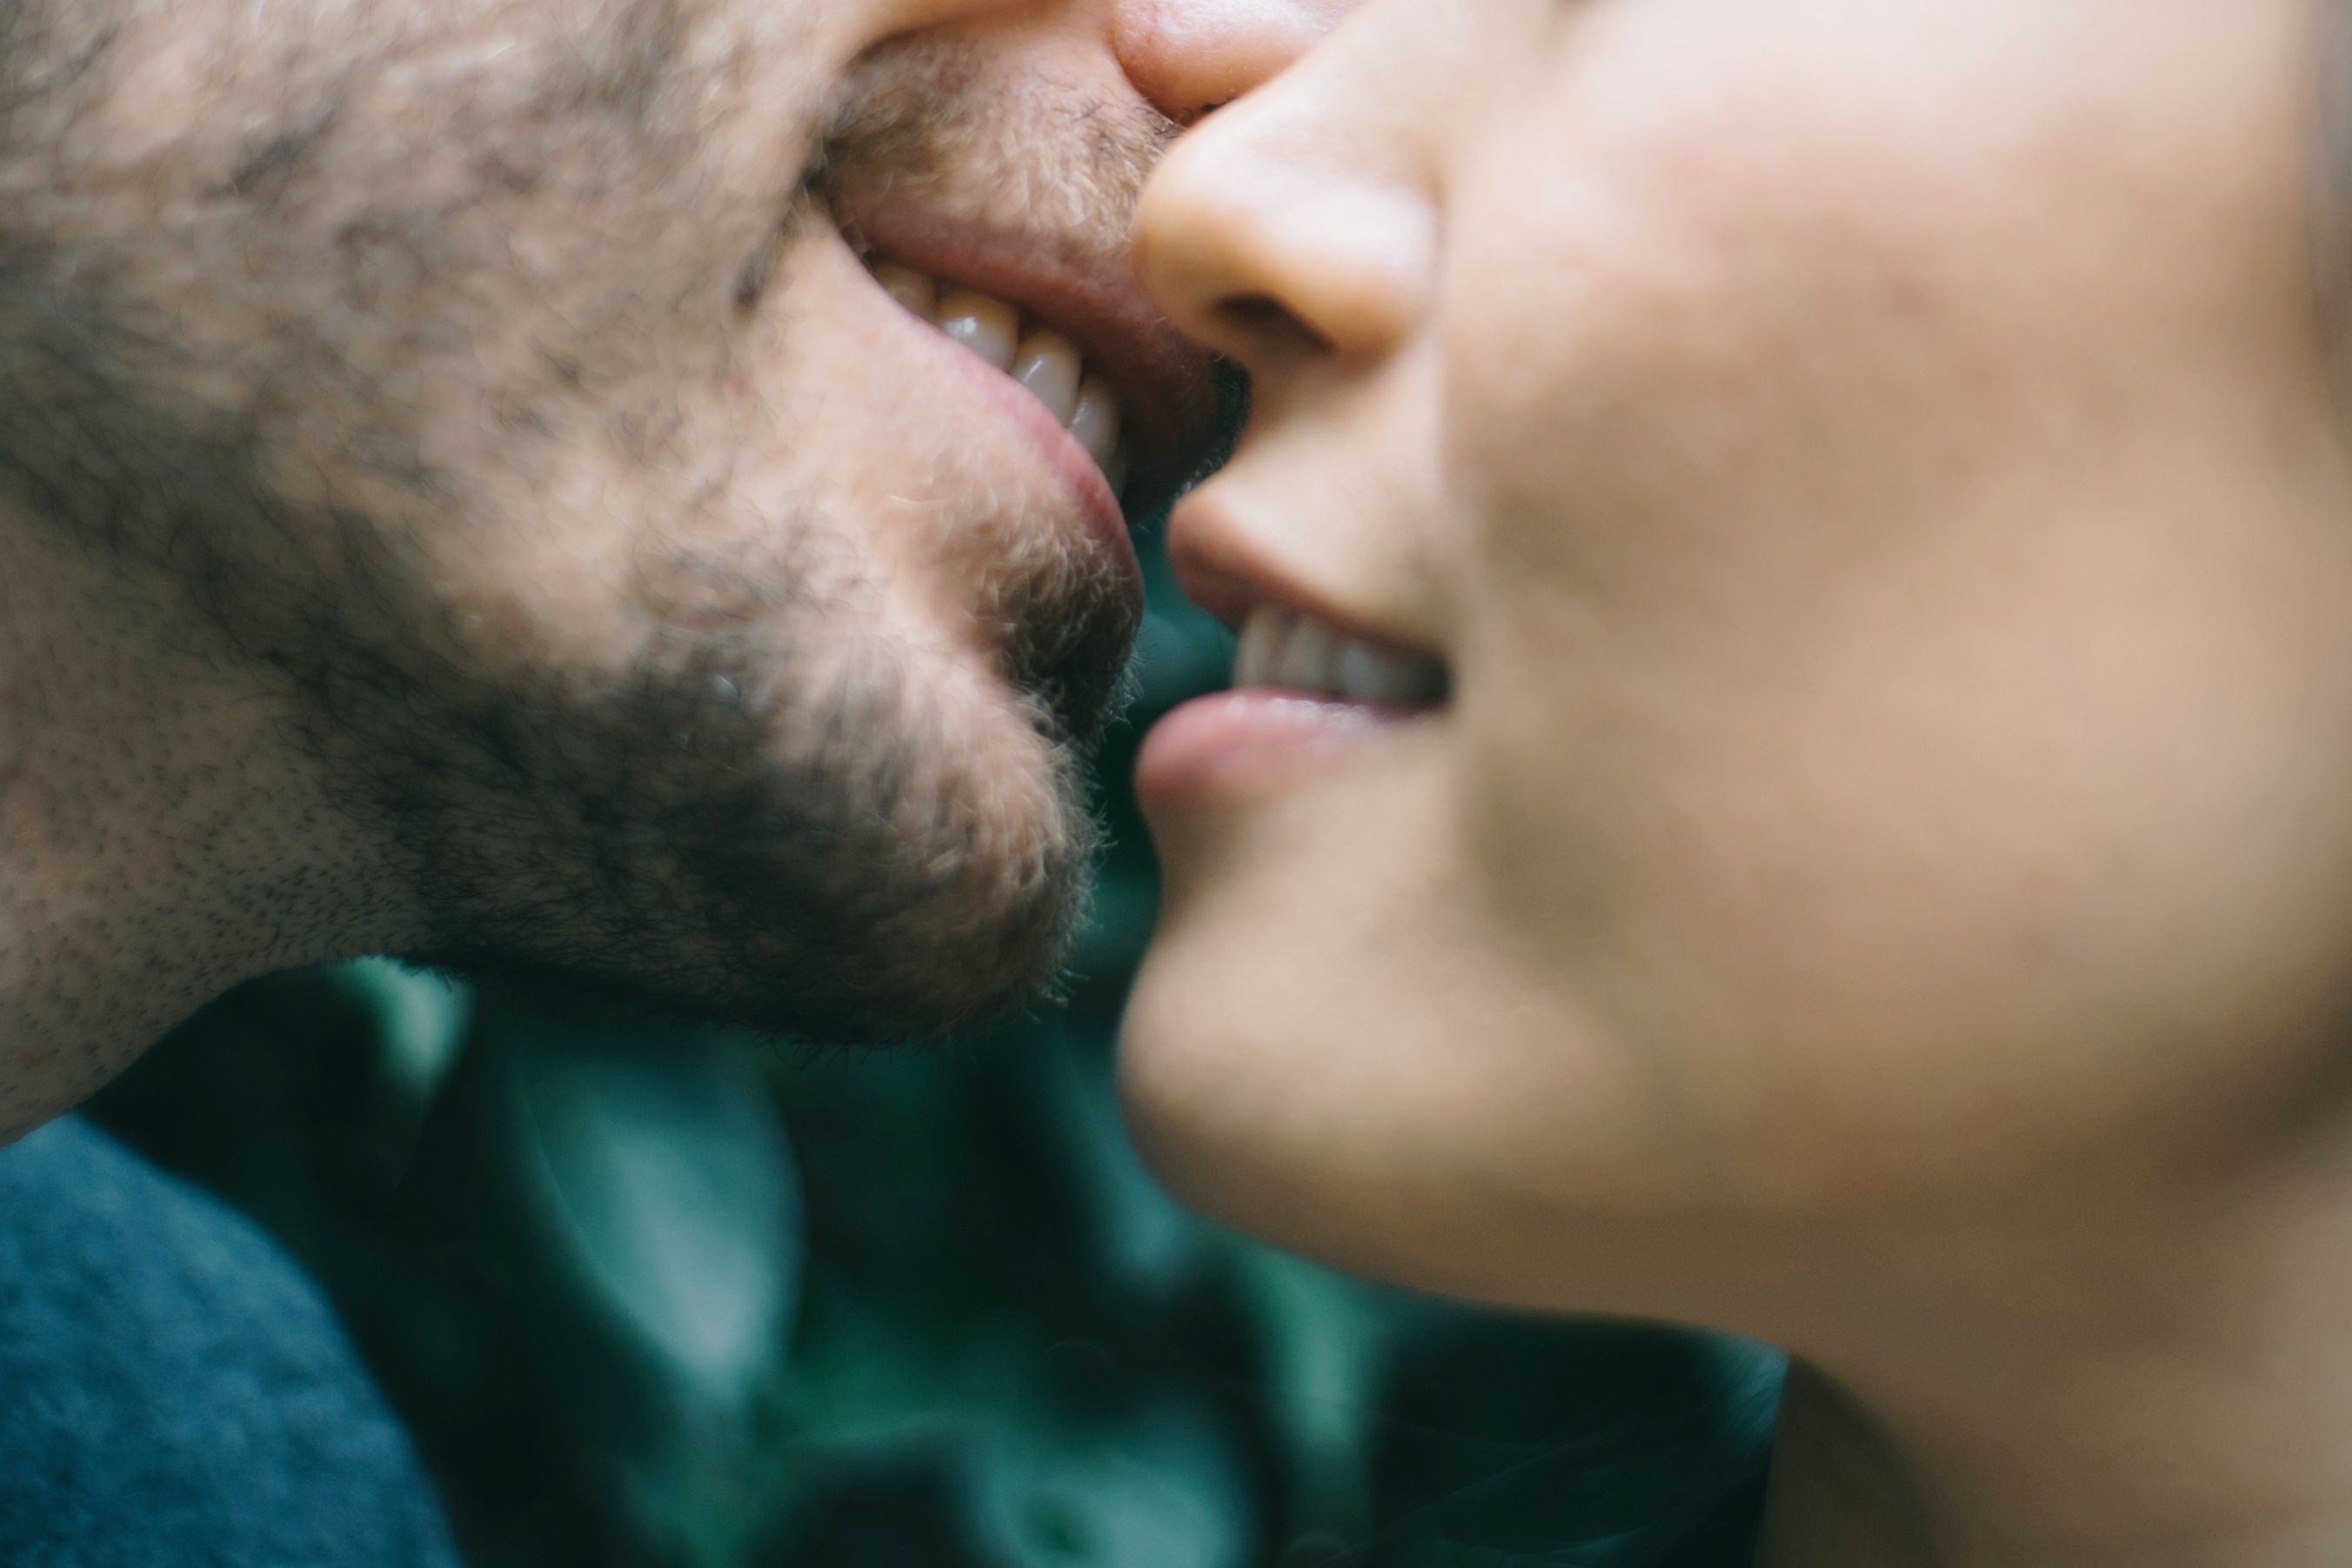 Smooched: Why You'll Never Forget Your First Kiss